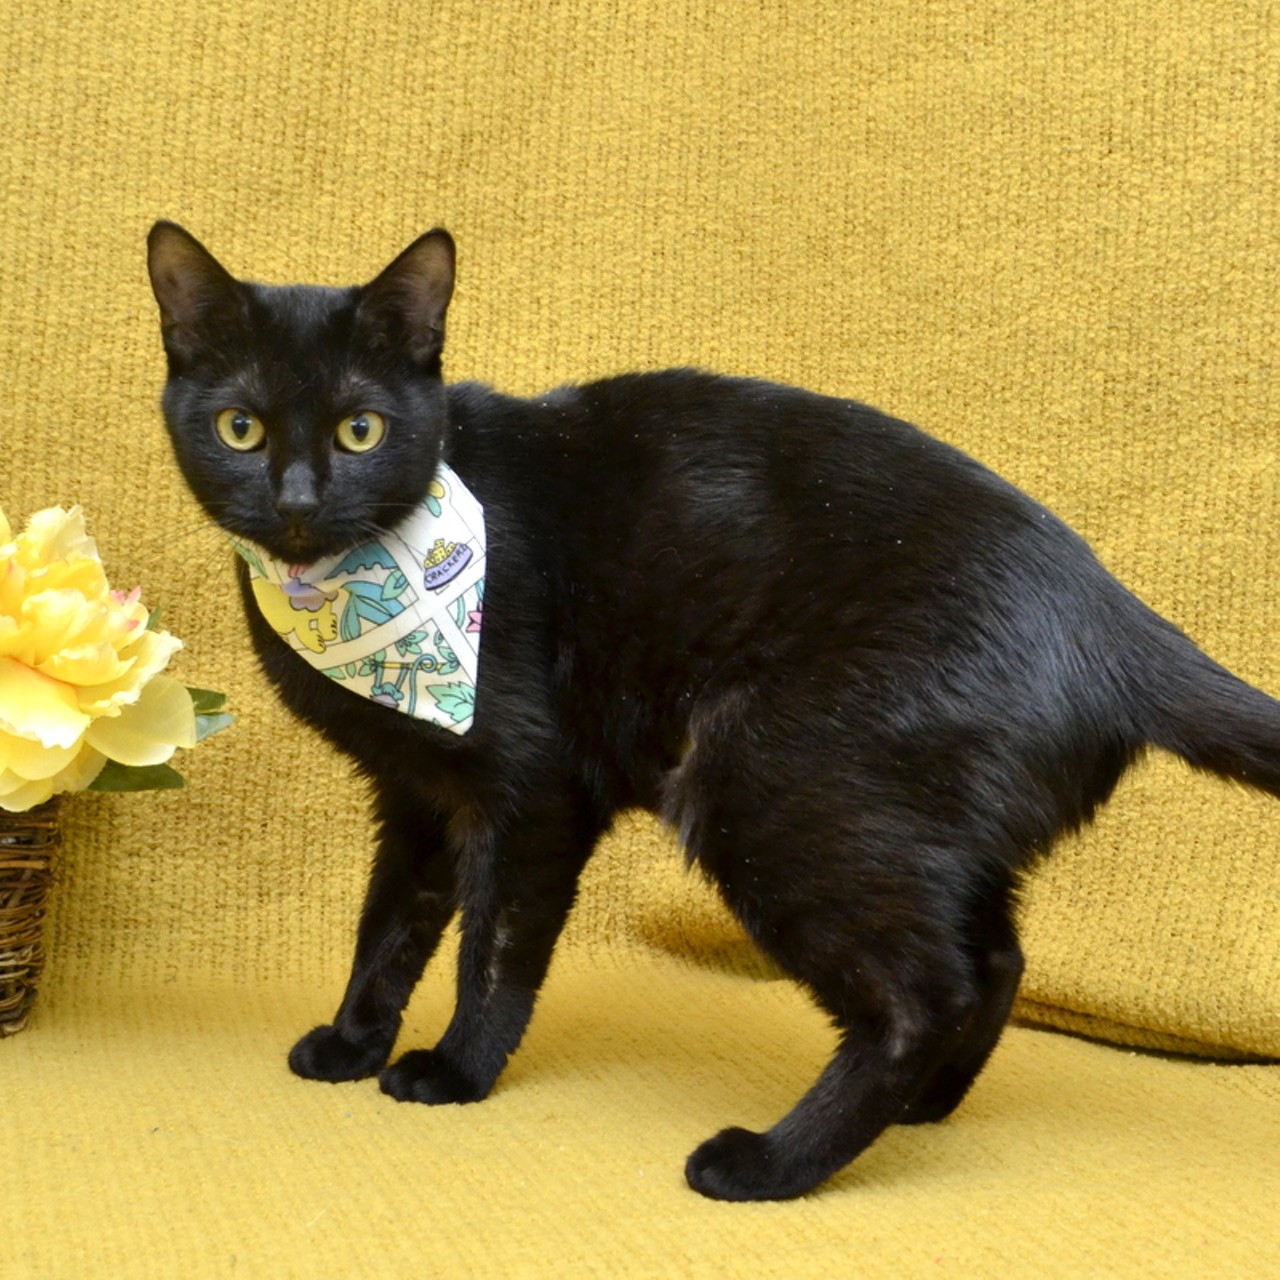 NAME:  Marnie
GENDER: Female
BREED: Domestic Short Hair
AGE: 2 years
WEIGHT: 7 pounds
SPECIAL CONSIDERATIONS: May prefer a home with older or no children
REASON I CAME TO MHS: Homeless in Westland
LOCATION: Berman Center for Animal Care in Westland
ID NUMBER: 867679